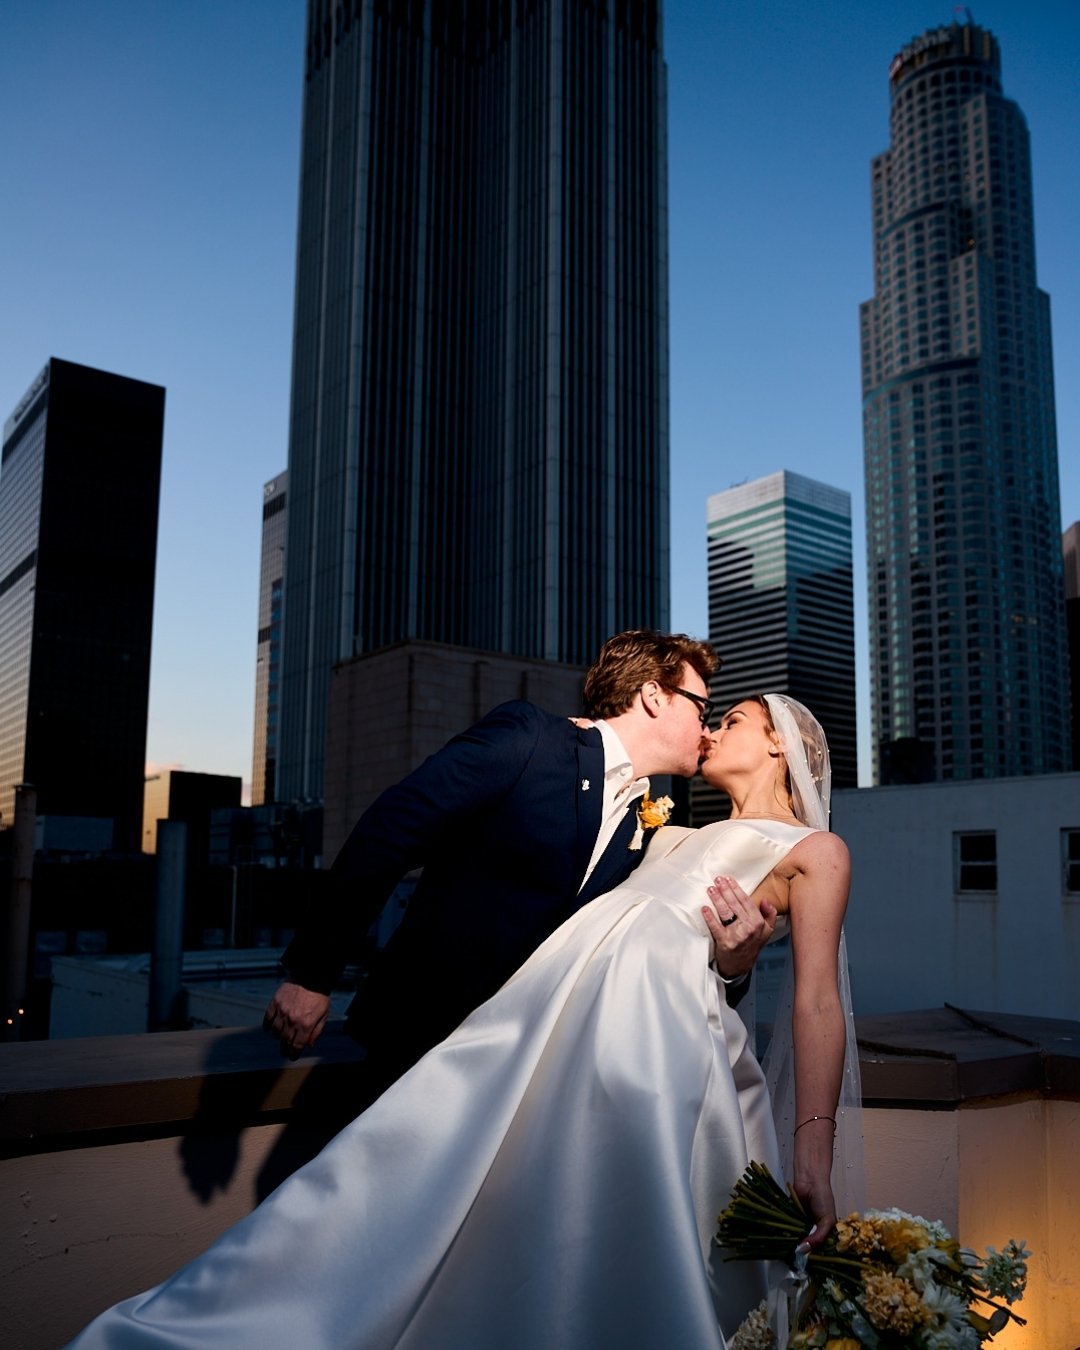 Capturing a timeless moment against the dazzling lights of downtown LA, Erin and Evan's love shines brightly at The Oviatt. Let our historic venue be the stunning backdrop for your own love story. 💖 #LoveInTheCity #TheOviattLA #UrbanRomance

Photogr